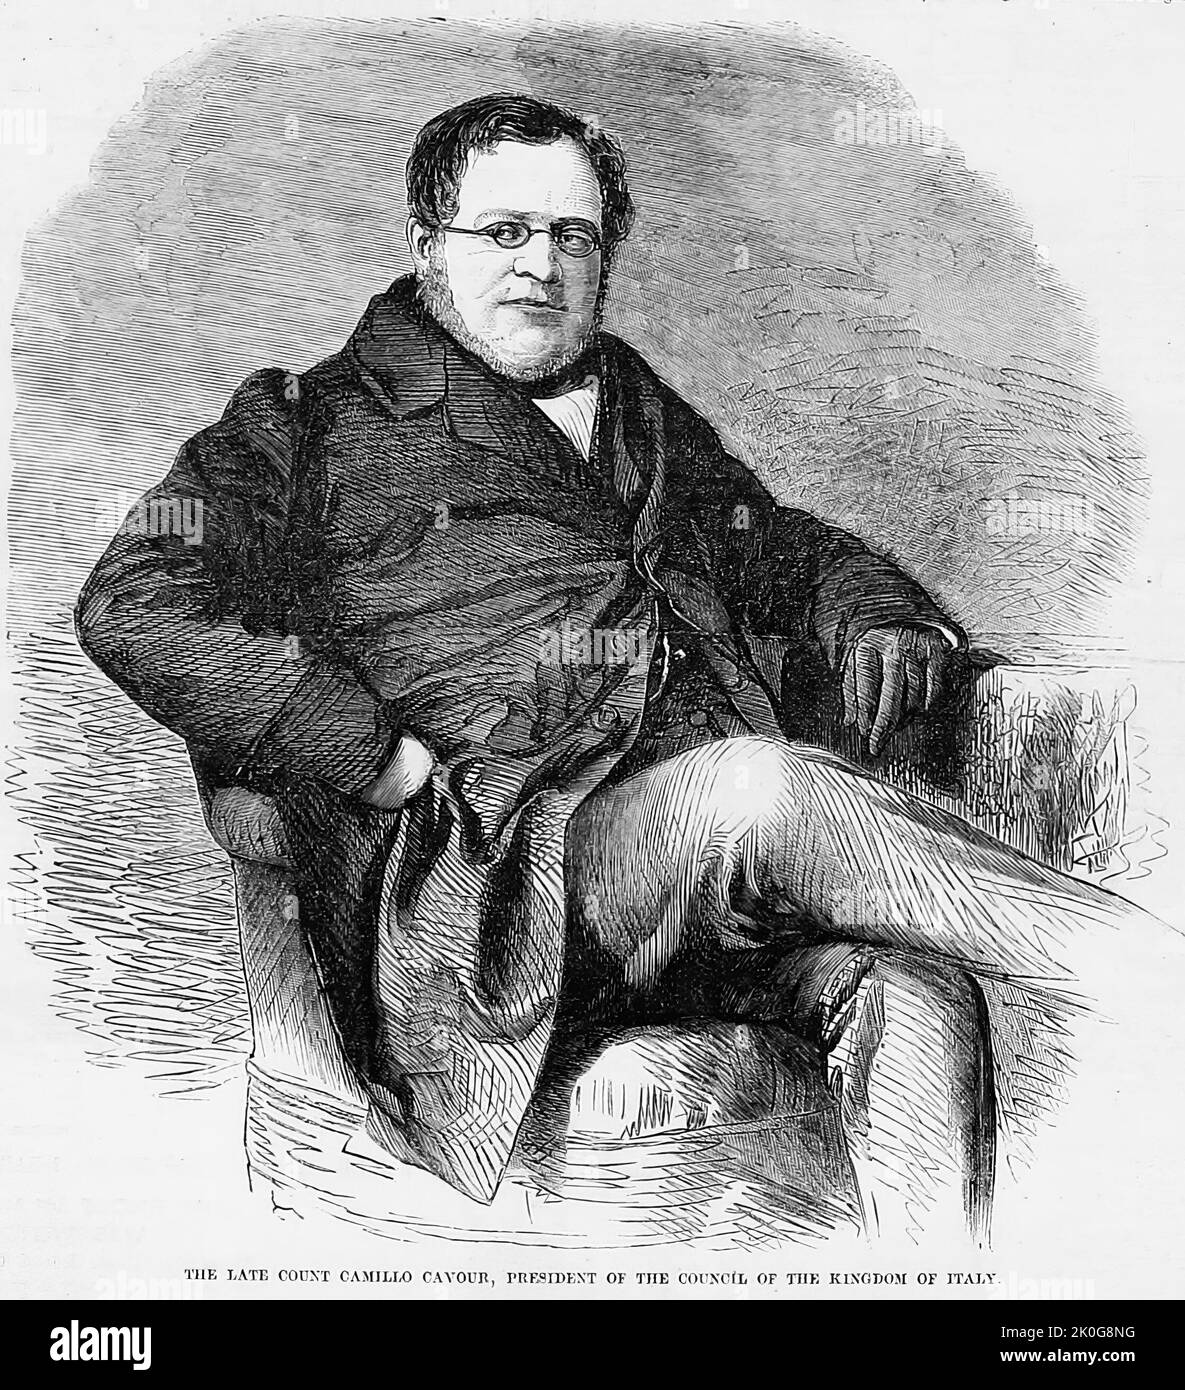 The late Camillo Benso, Count of Cavour, President of the Council of the Kingdom of Italy (1861). 19th century illustration from Frank Leslie's Illustrated Newspaper Stock Photo